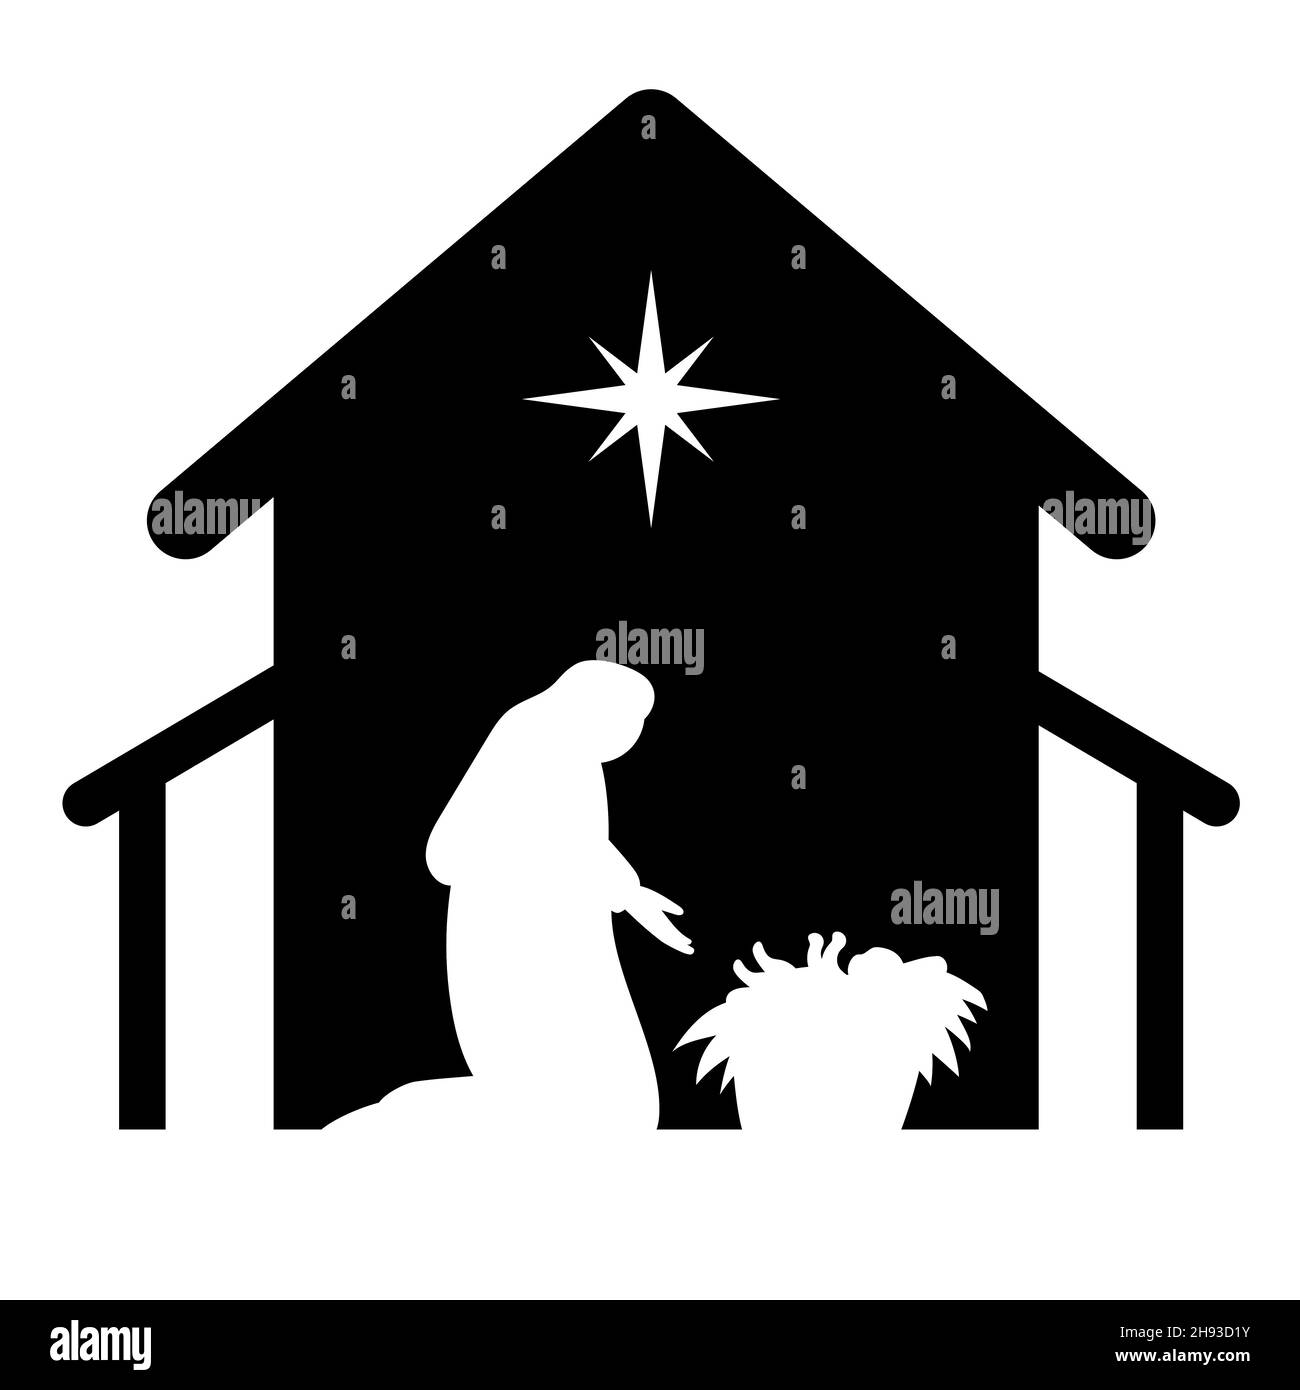 Holy night of birth of child jesus christ silhouette scene from religion christianity nativity scene. Biblical Religious History of Catholics. Cut for Stock Vector